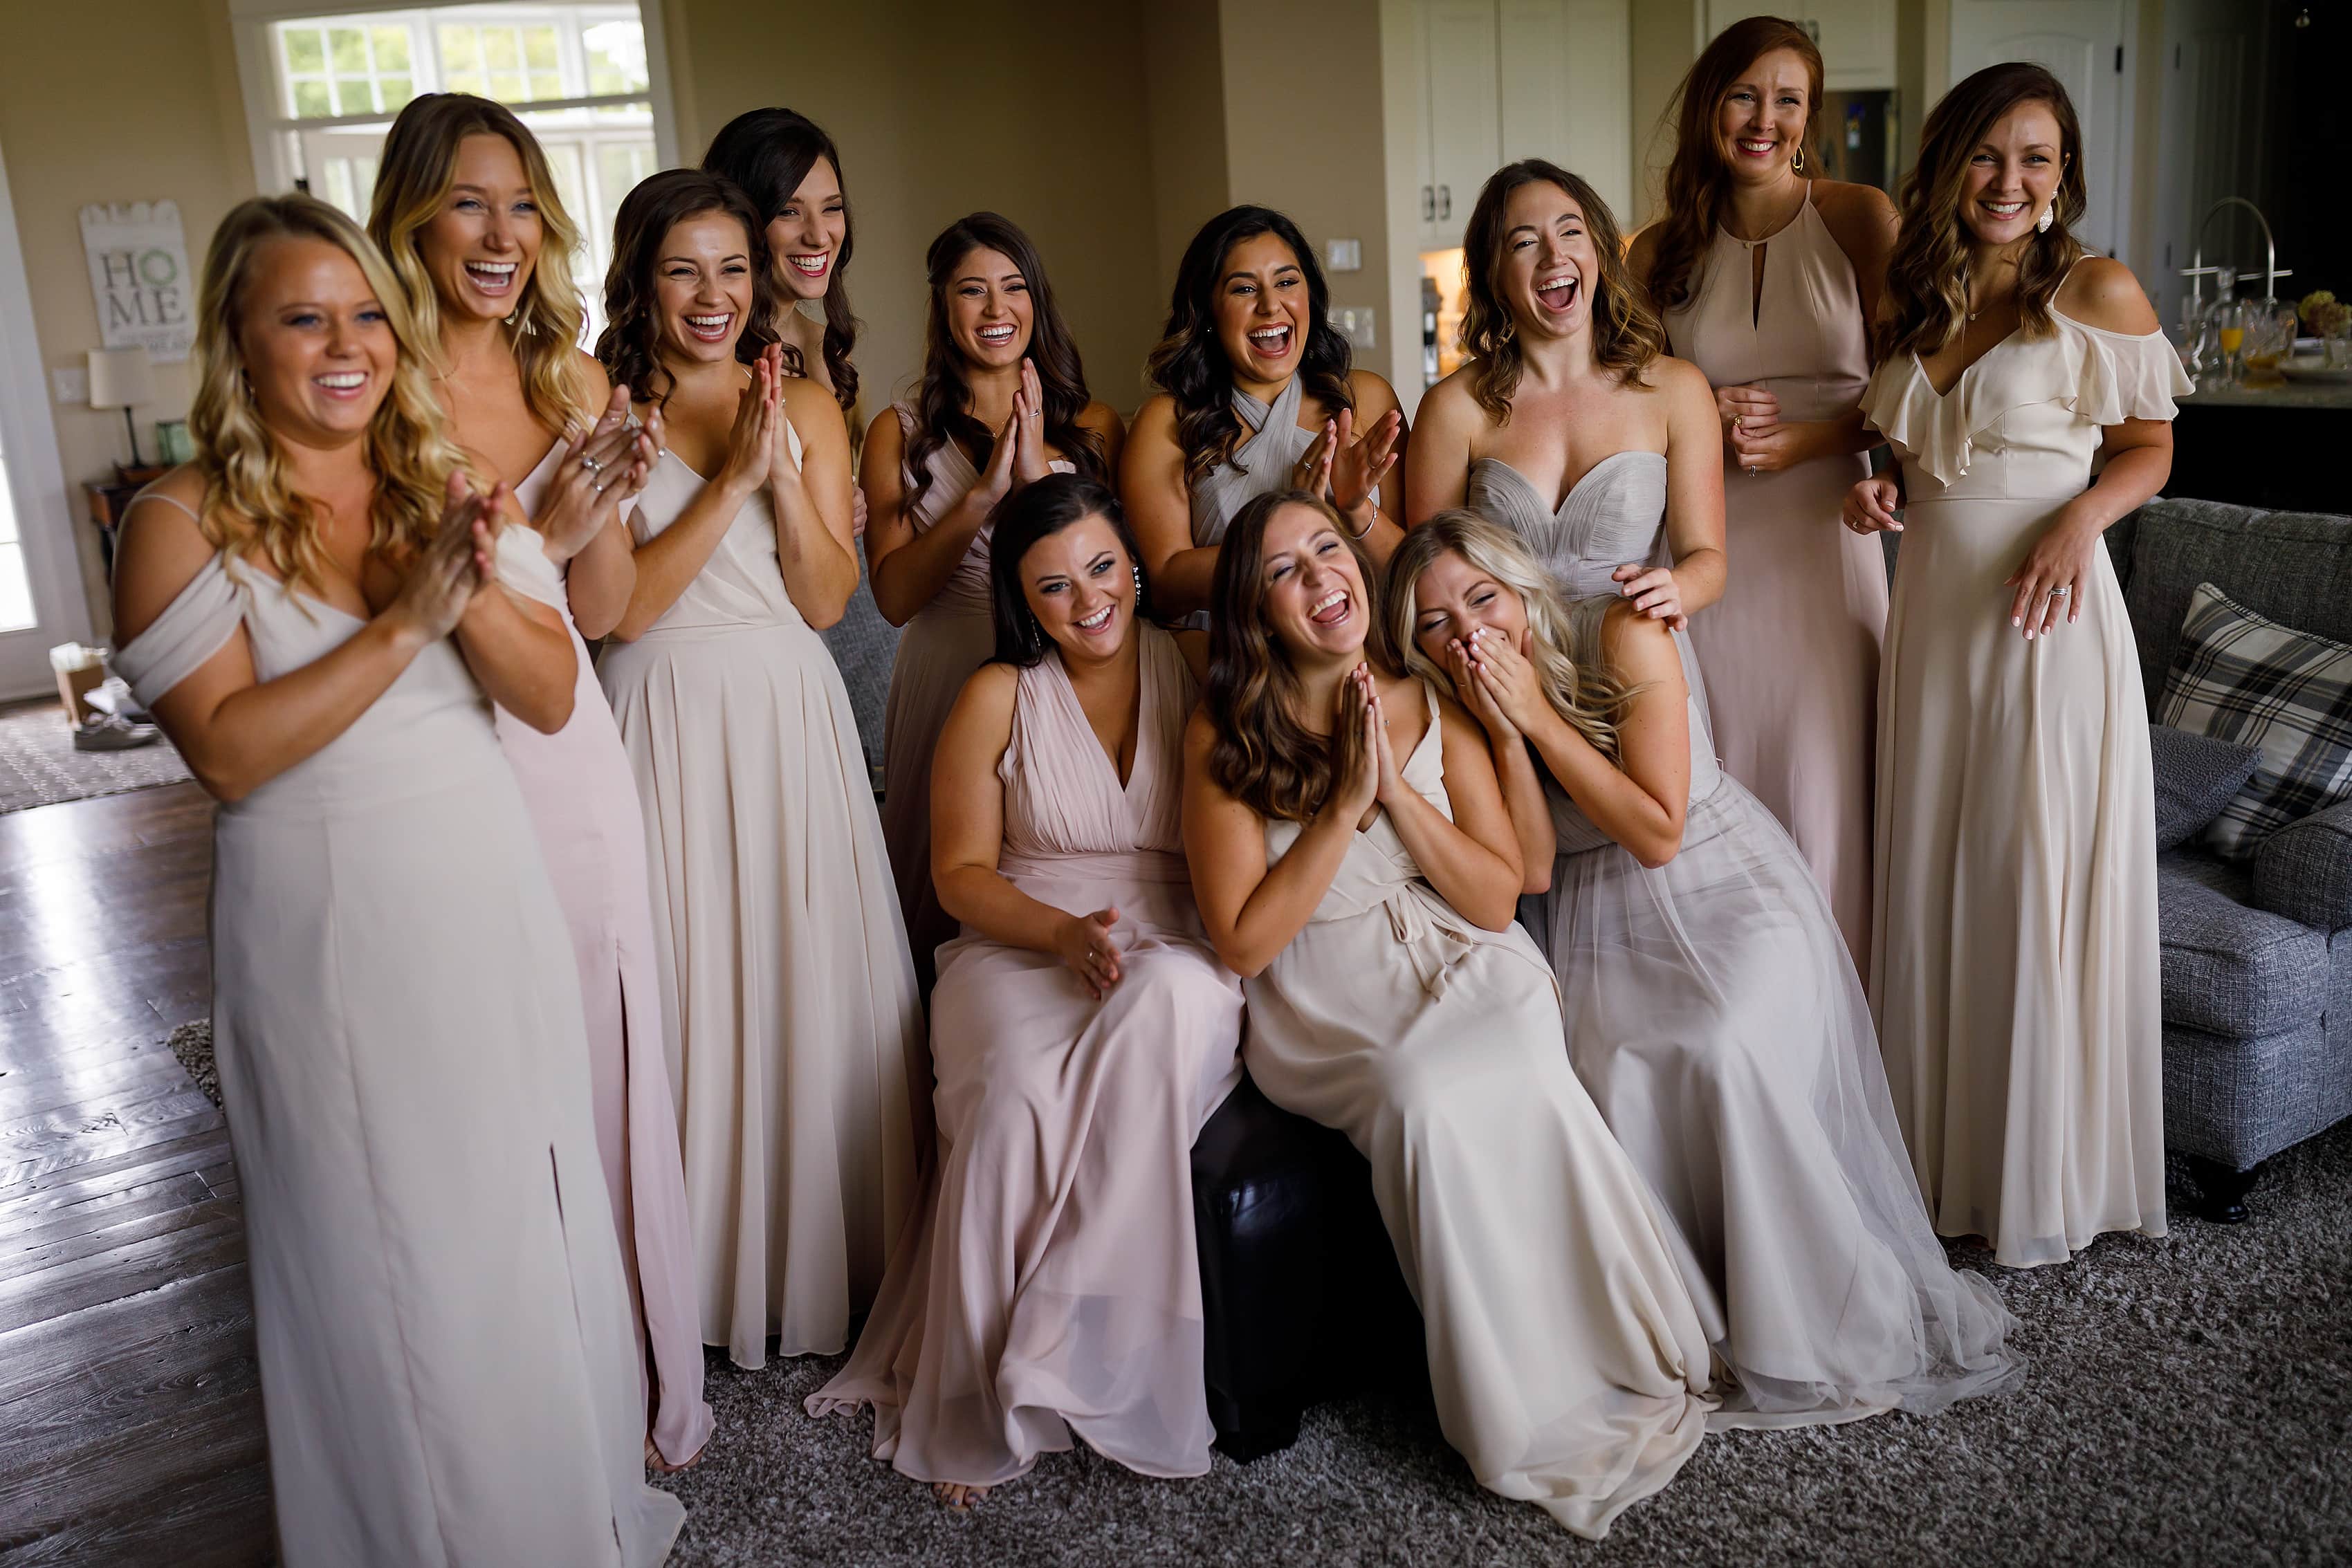 Group of bridesmaids reacts to seeing bride in her dress while getting ready for wedding